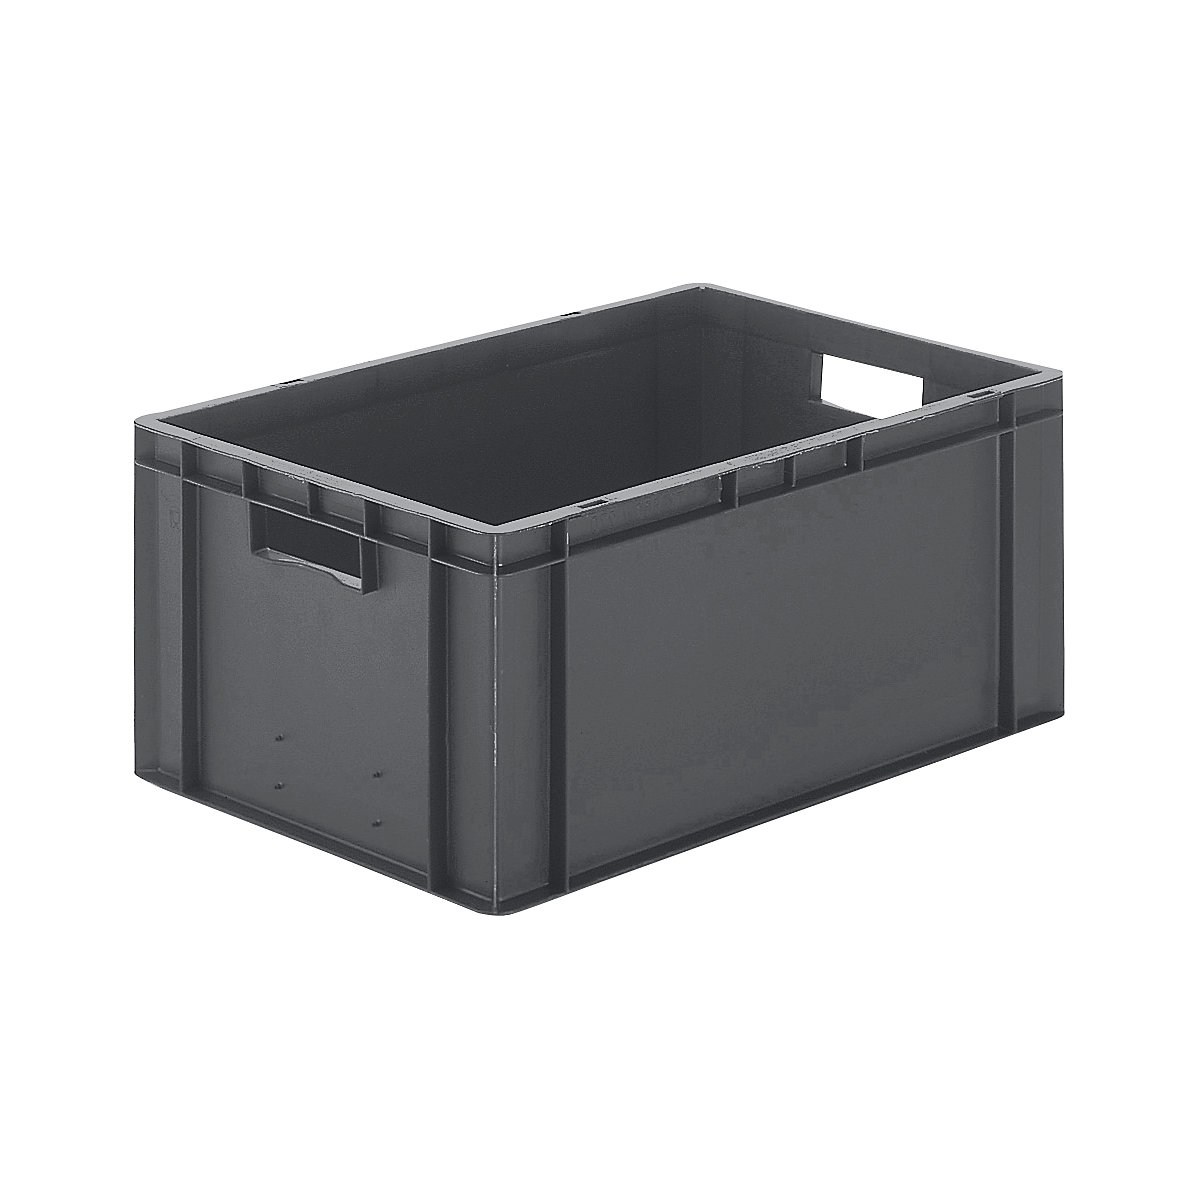 Euro stacking container, closed walls and base, LxWxH 600 x 400 x 270 mm, grey, pack of 5-5